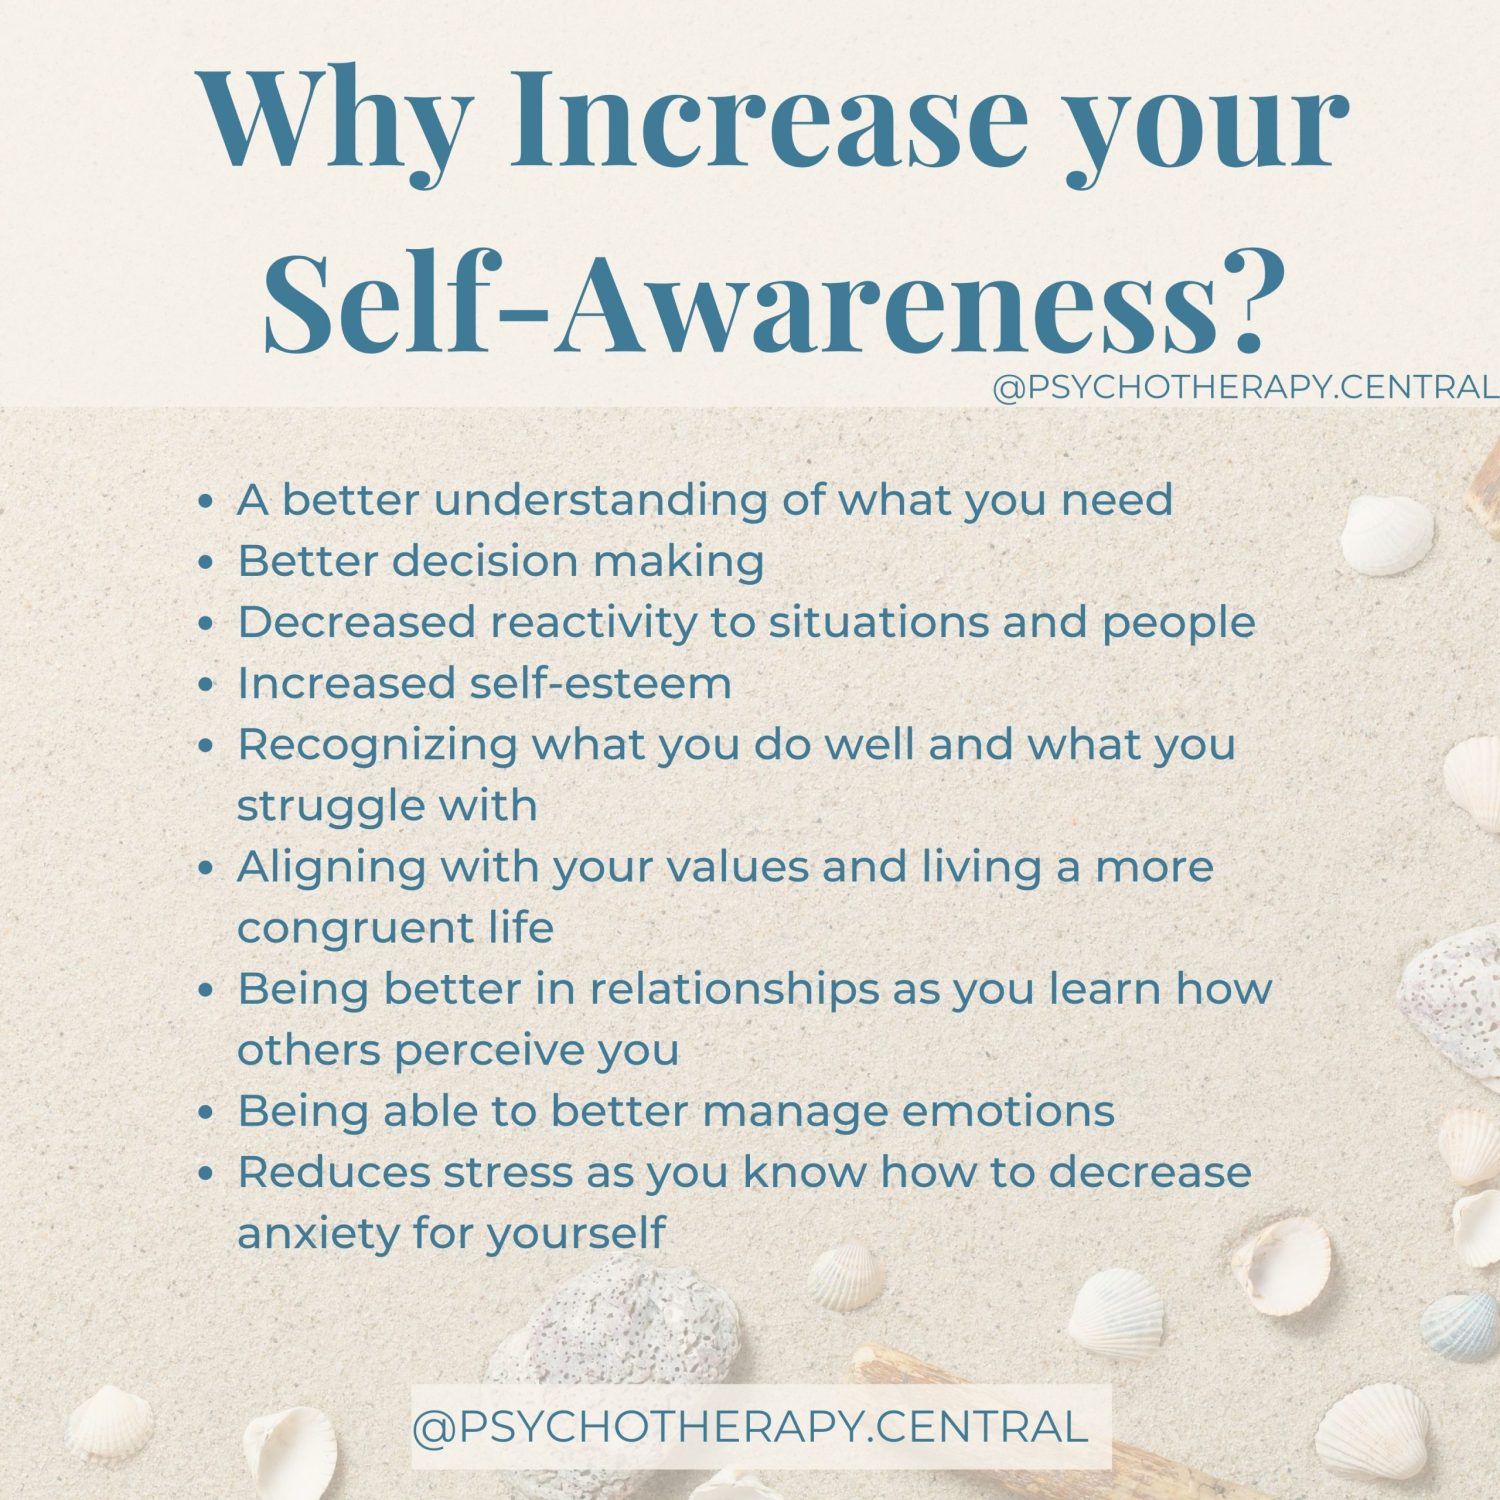 What role does self-awareness play in emotional health?